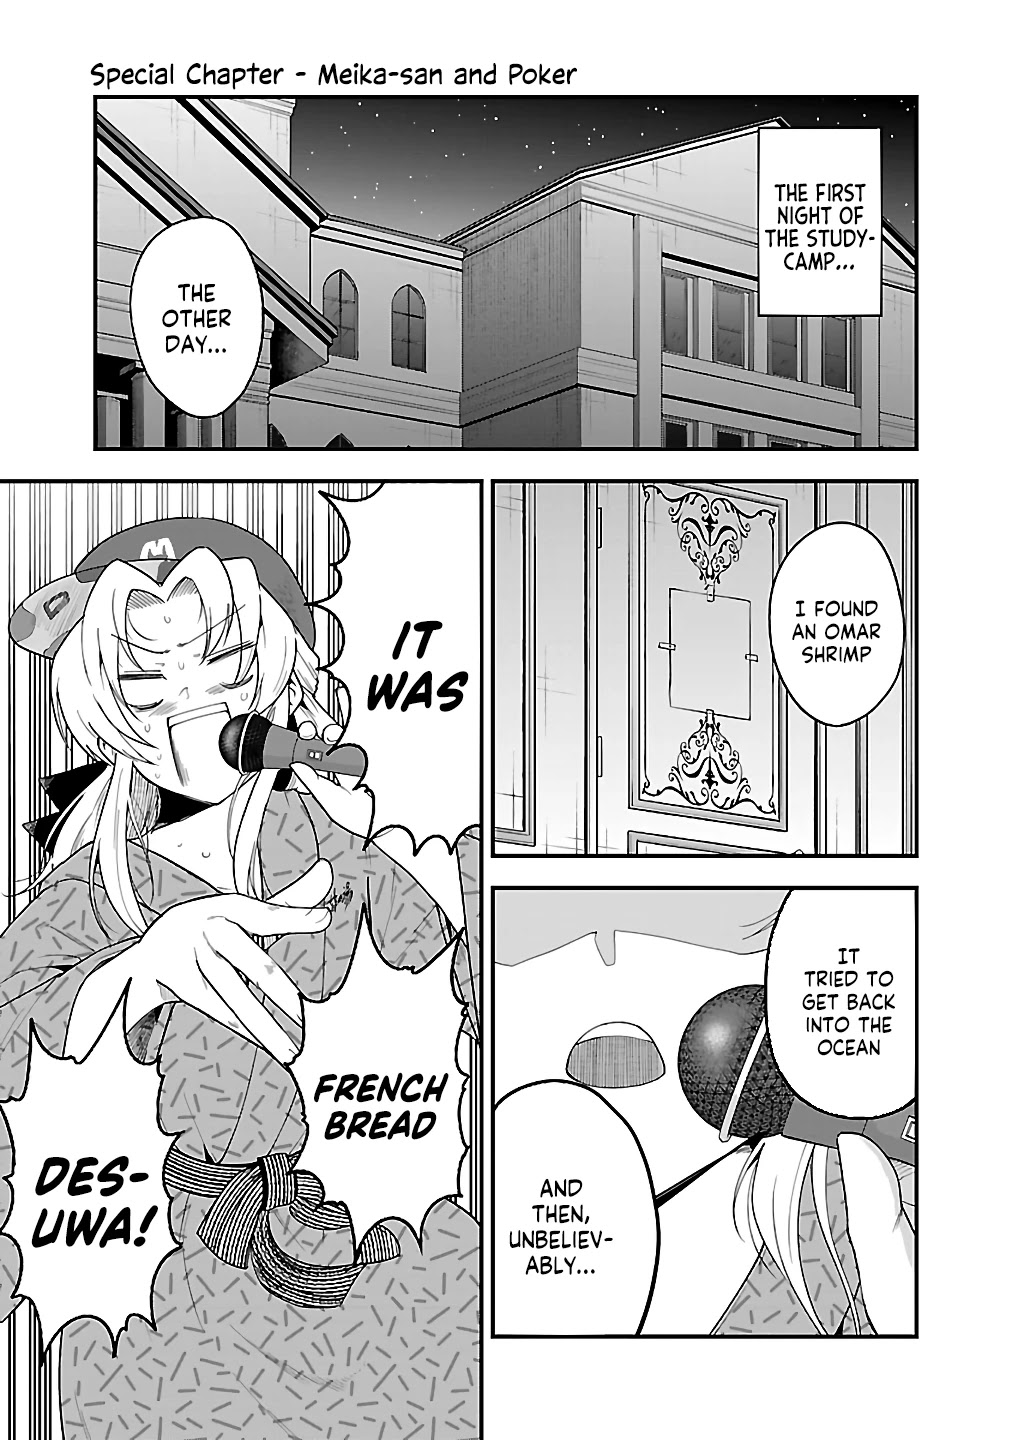 Meika-San Can't Conceal Her Emotions - Page 2